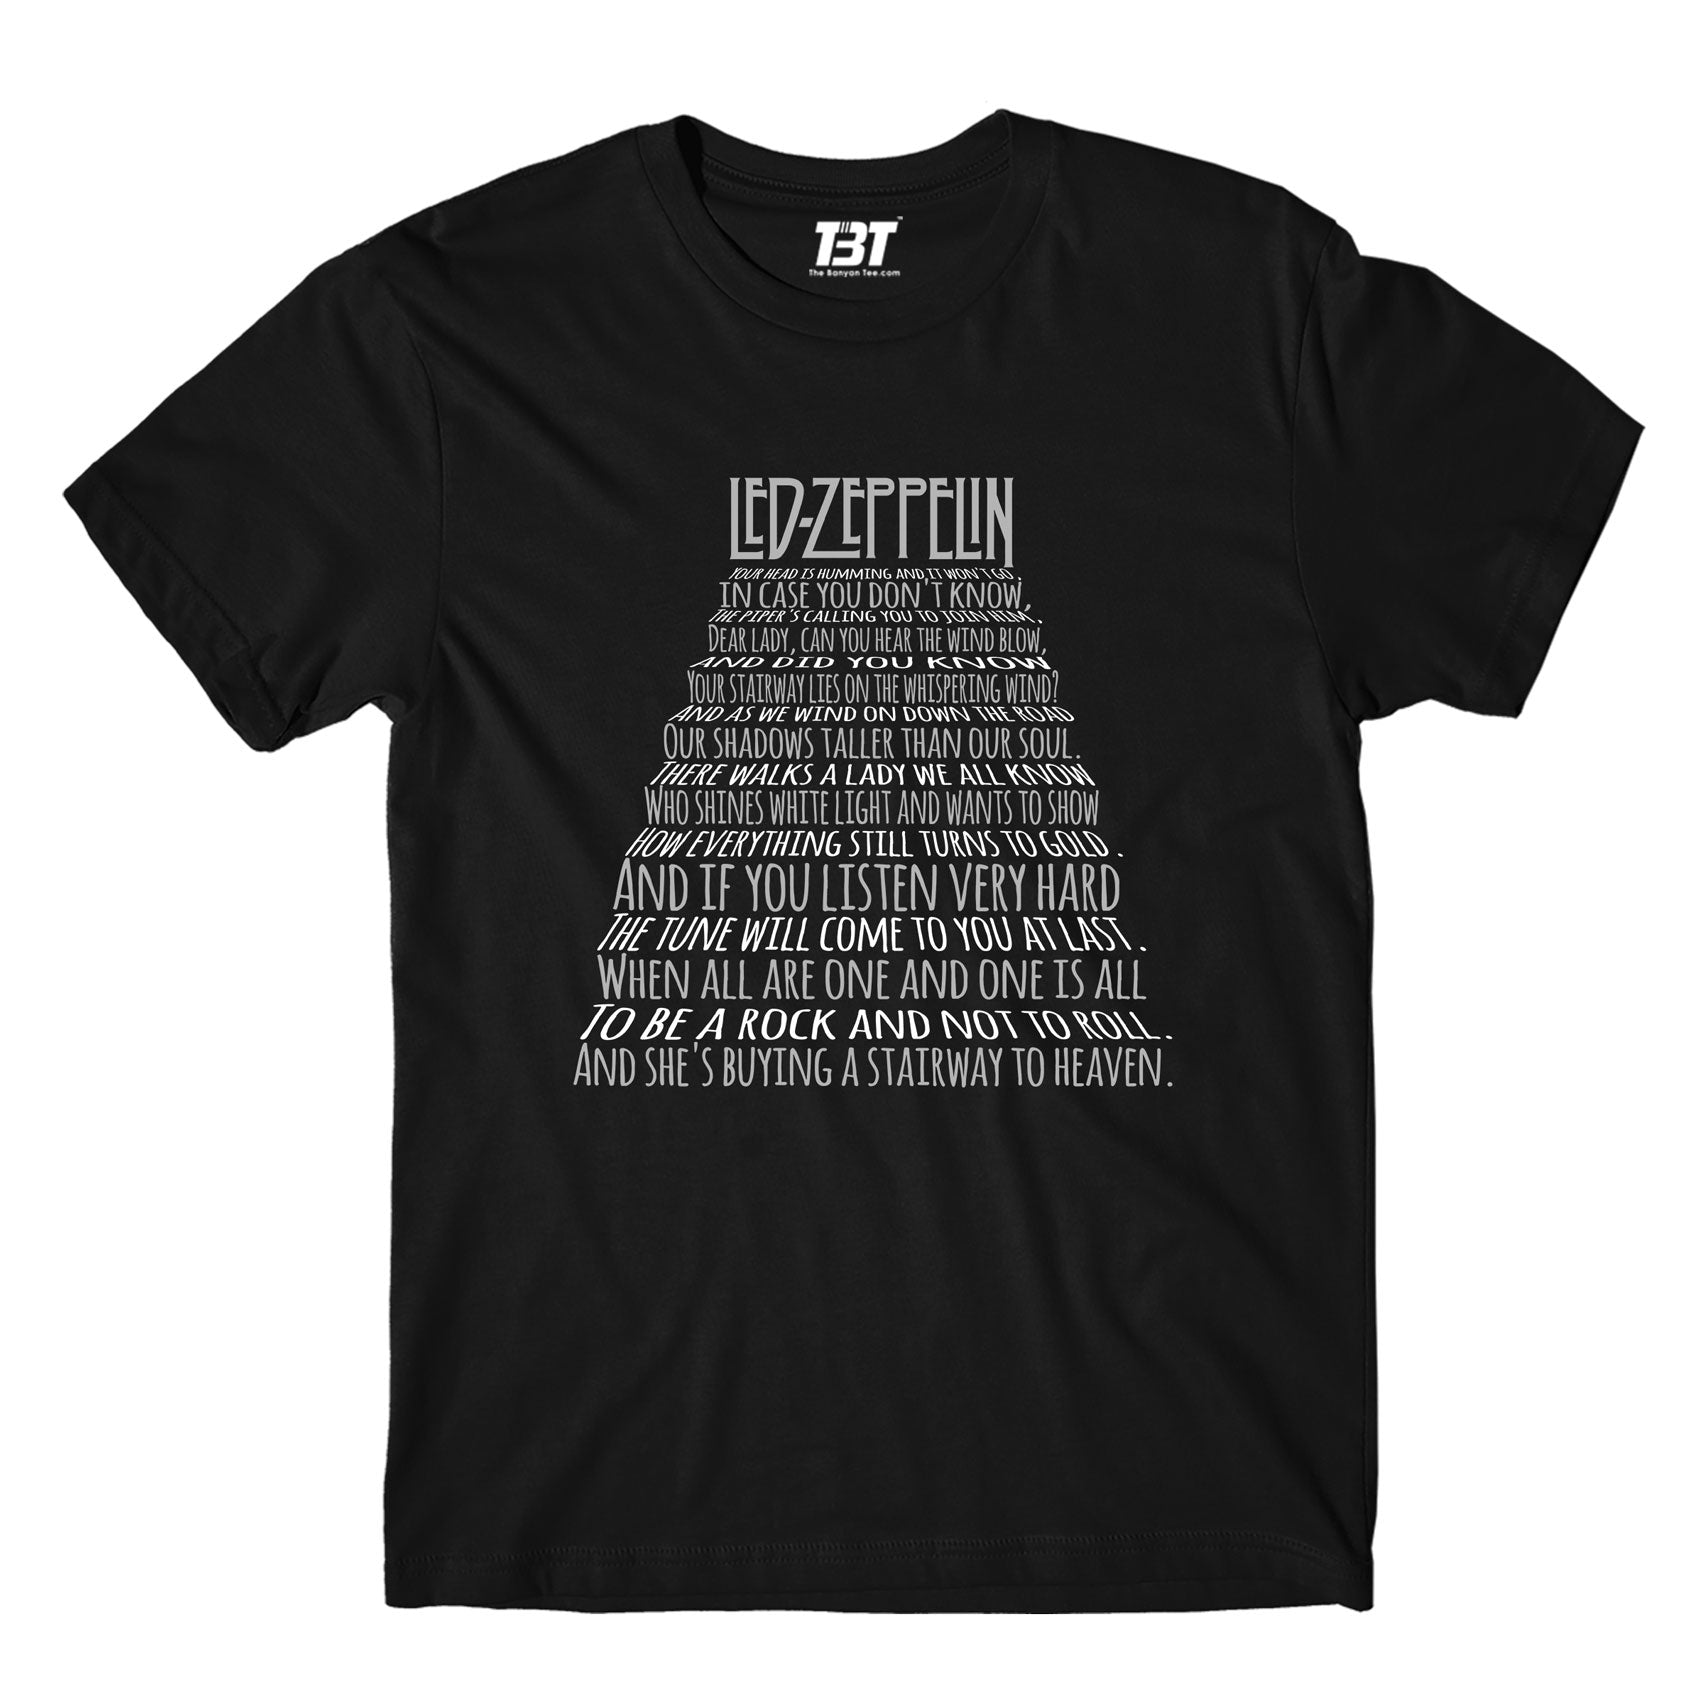 the banyan tee merch on sale Led Zeppelin T shirt - On Sale - XS (Chest size 36 IN)